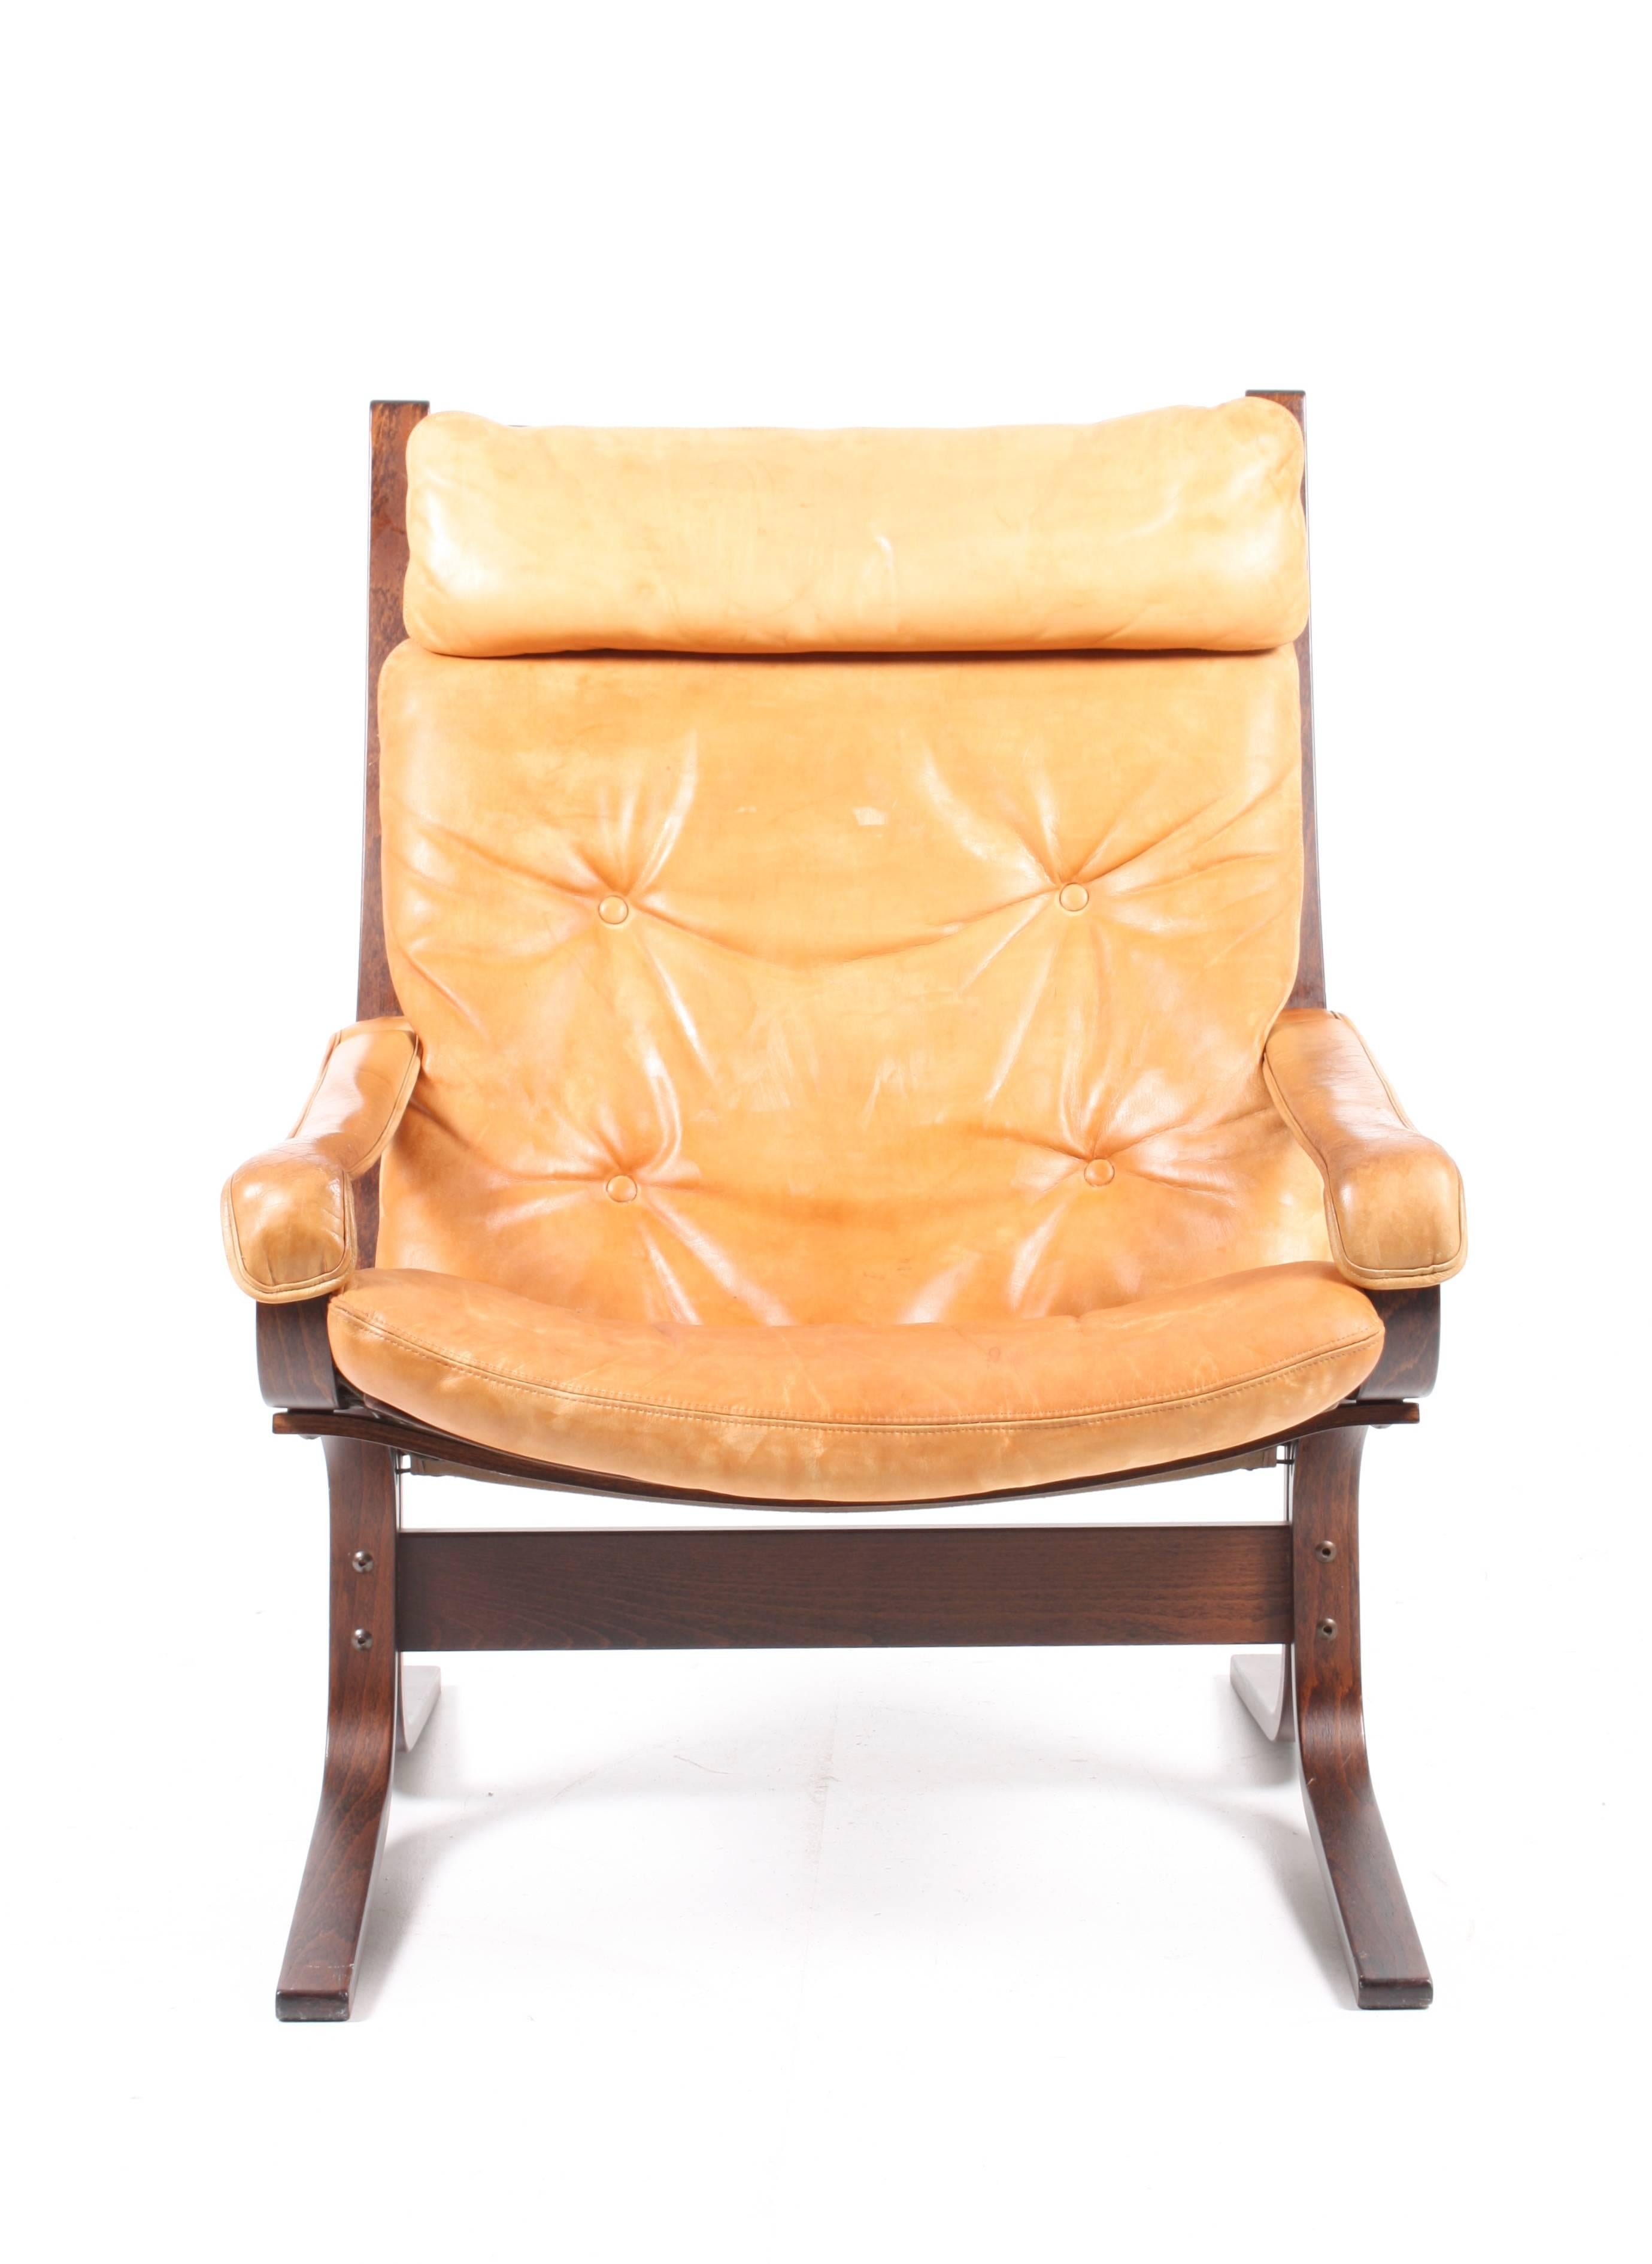 Classic lounge chair designed by Ingmar Relling in 1968 for Westnofa.
Well patinated leather and great comfort. Made in Norway. Original condition.